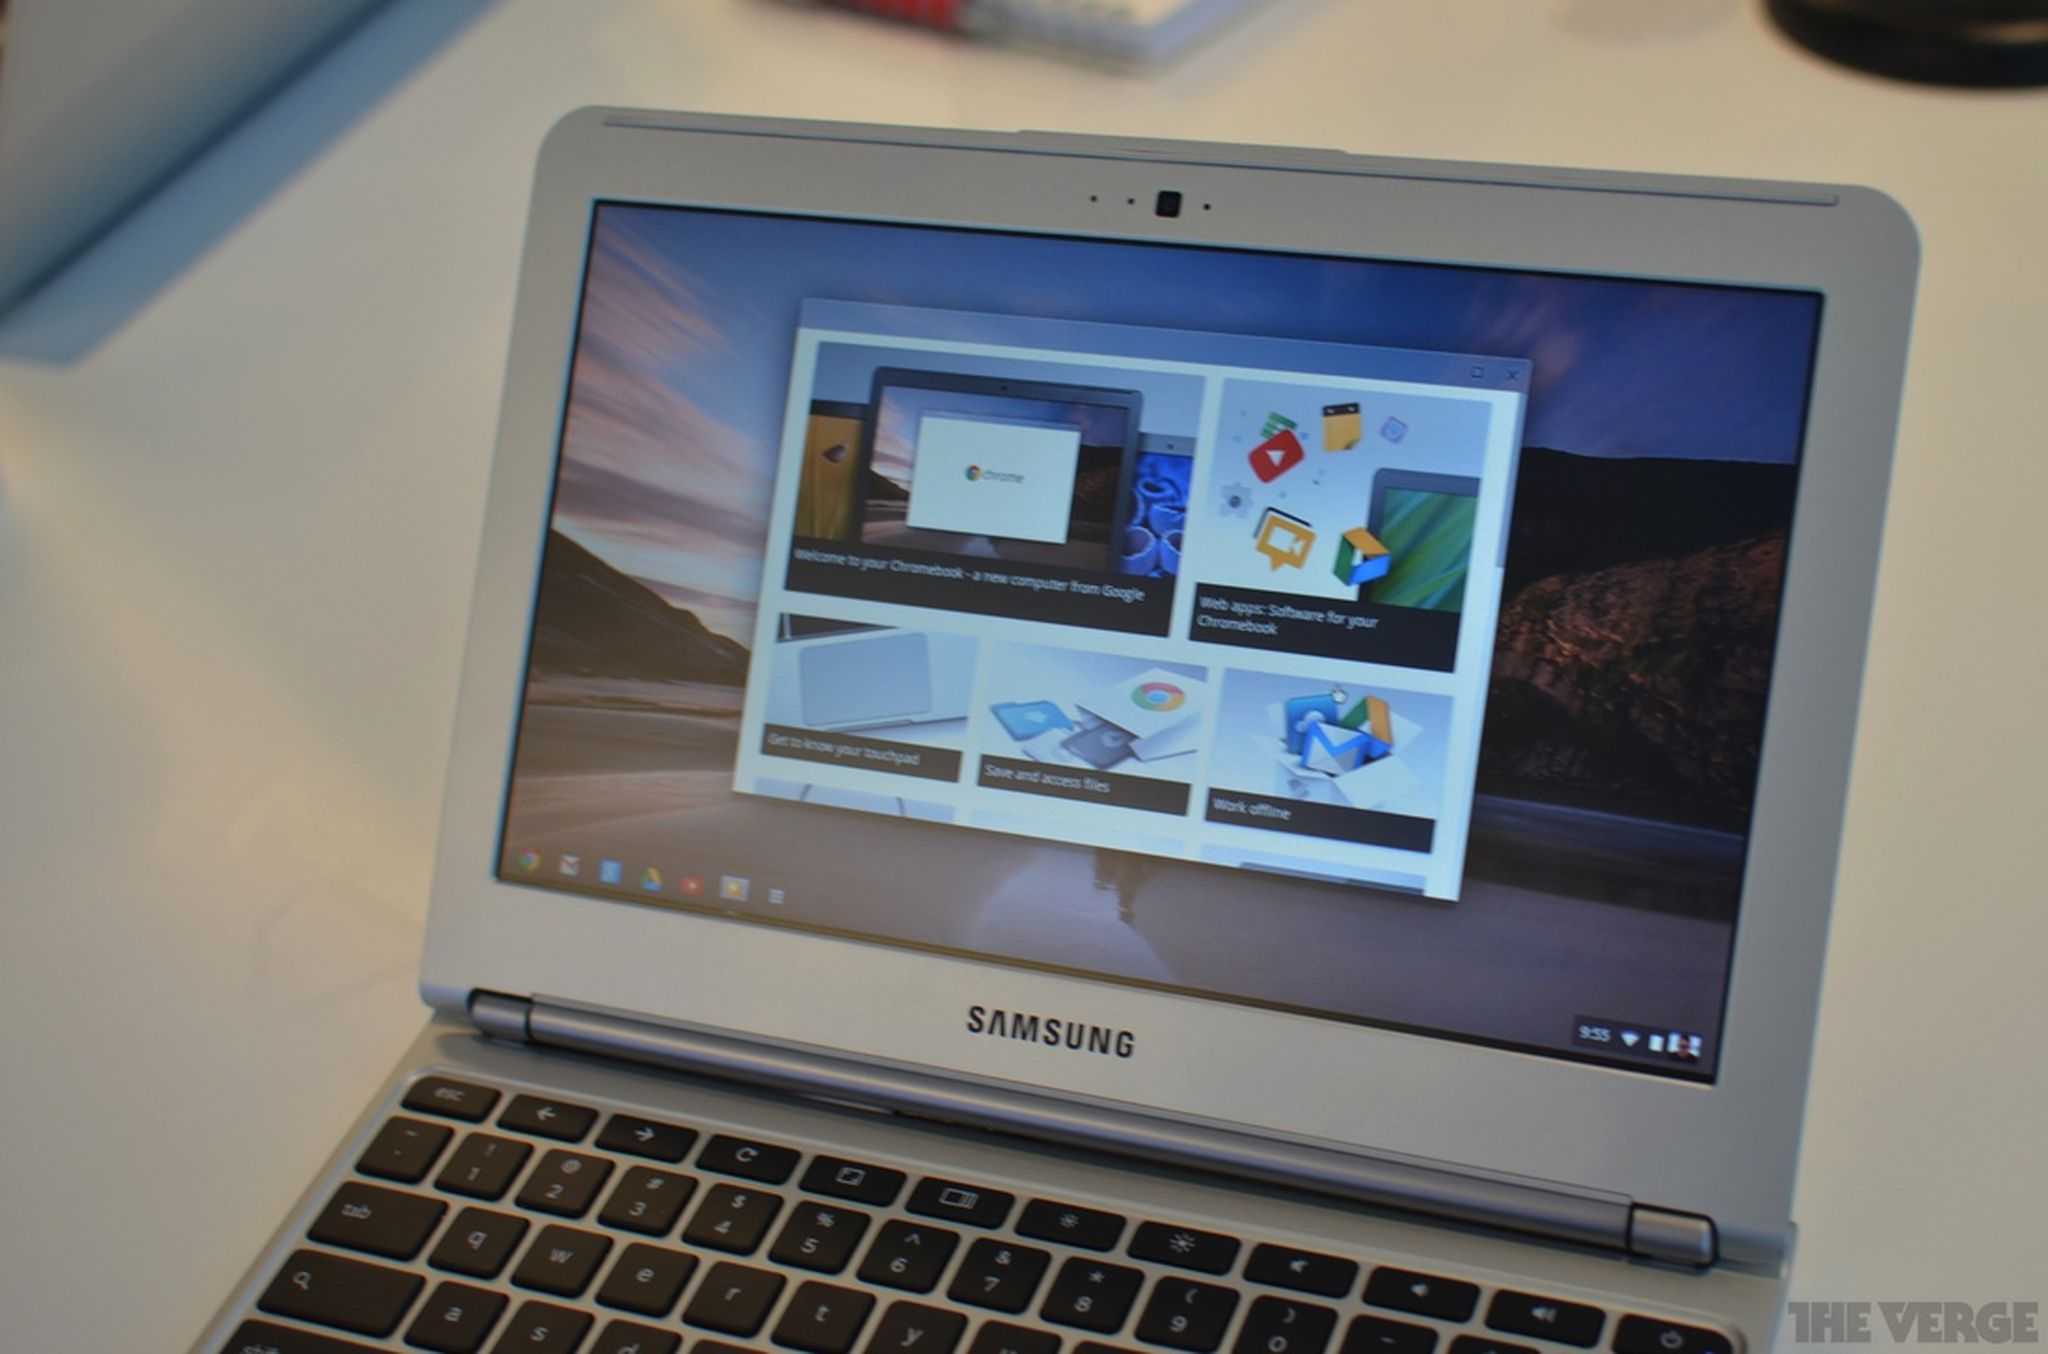 Google announces new Samsung Chromebook, available for 249 on Monday